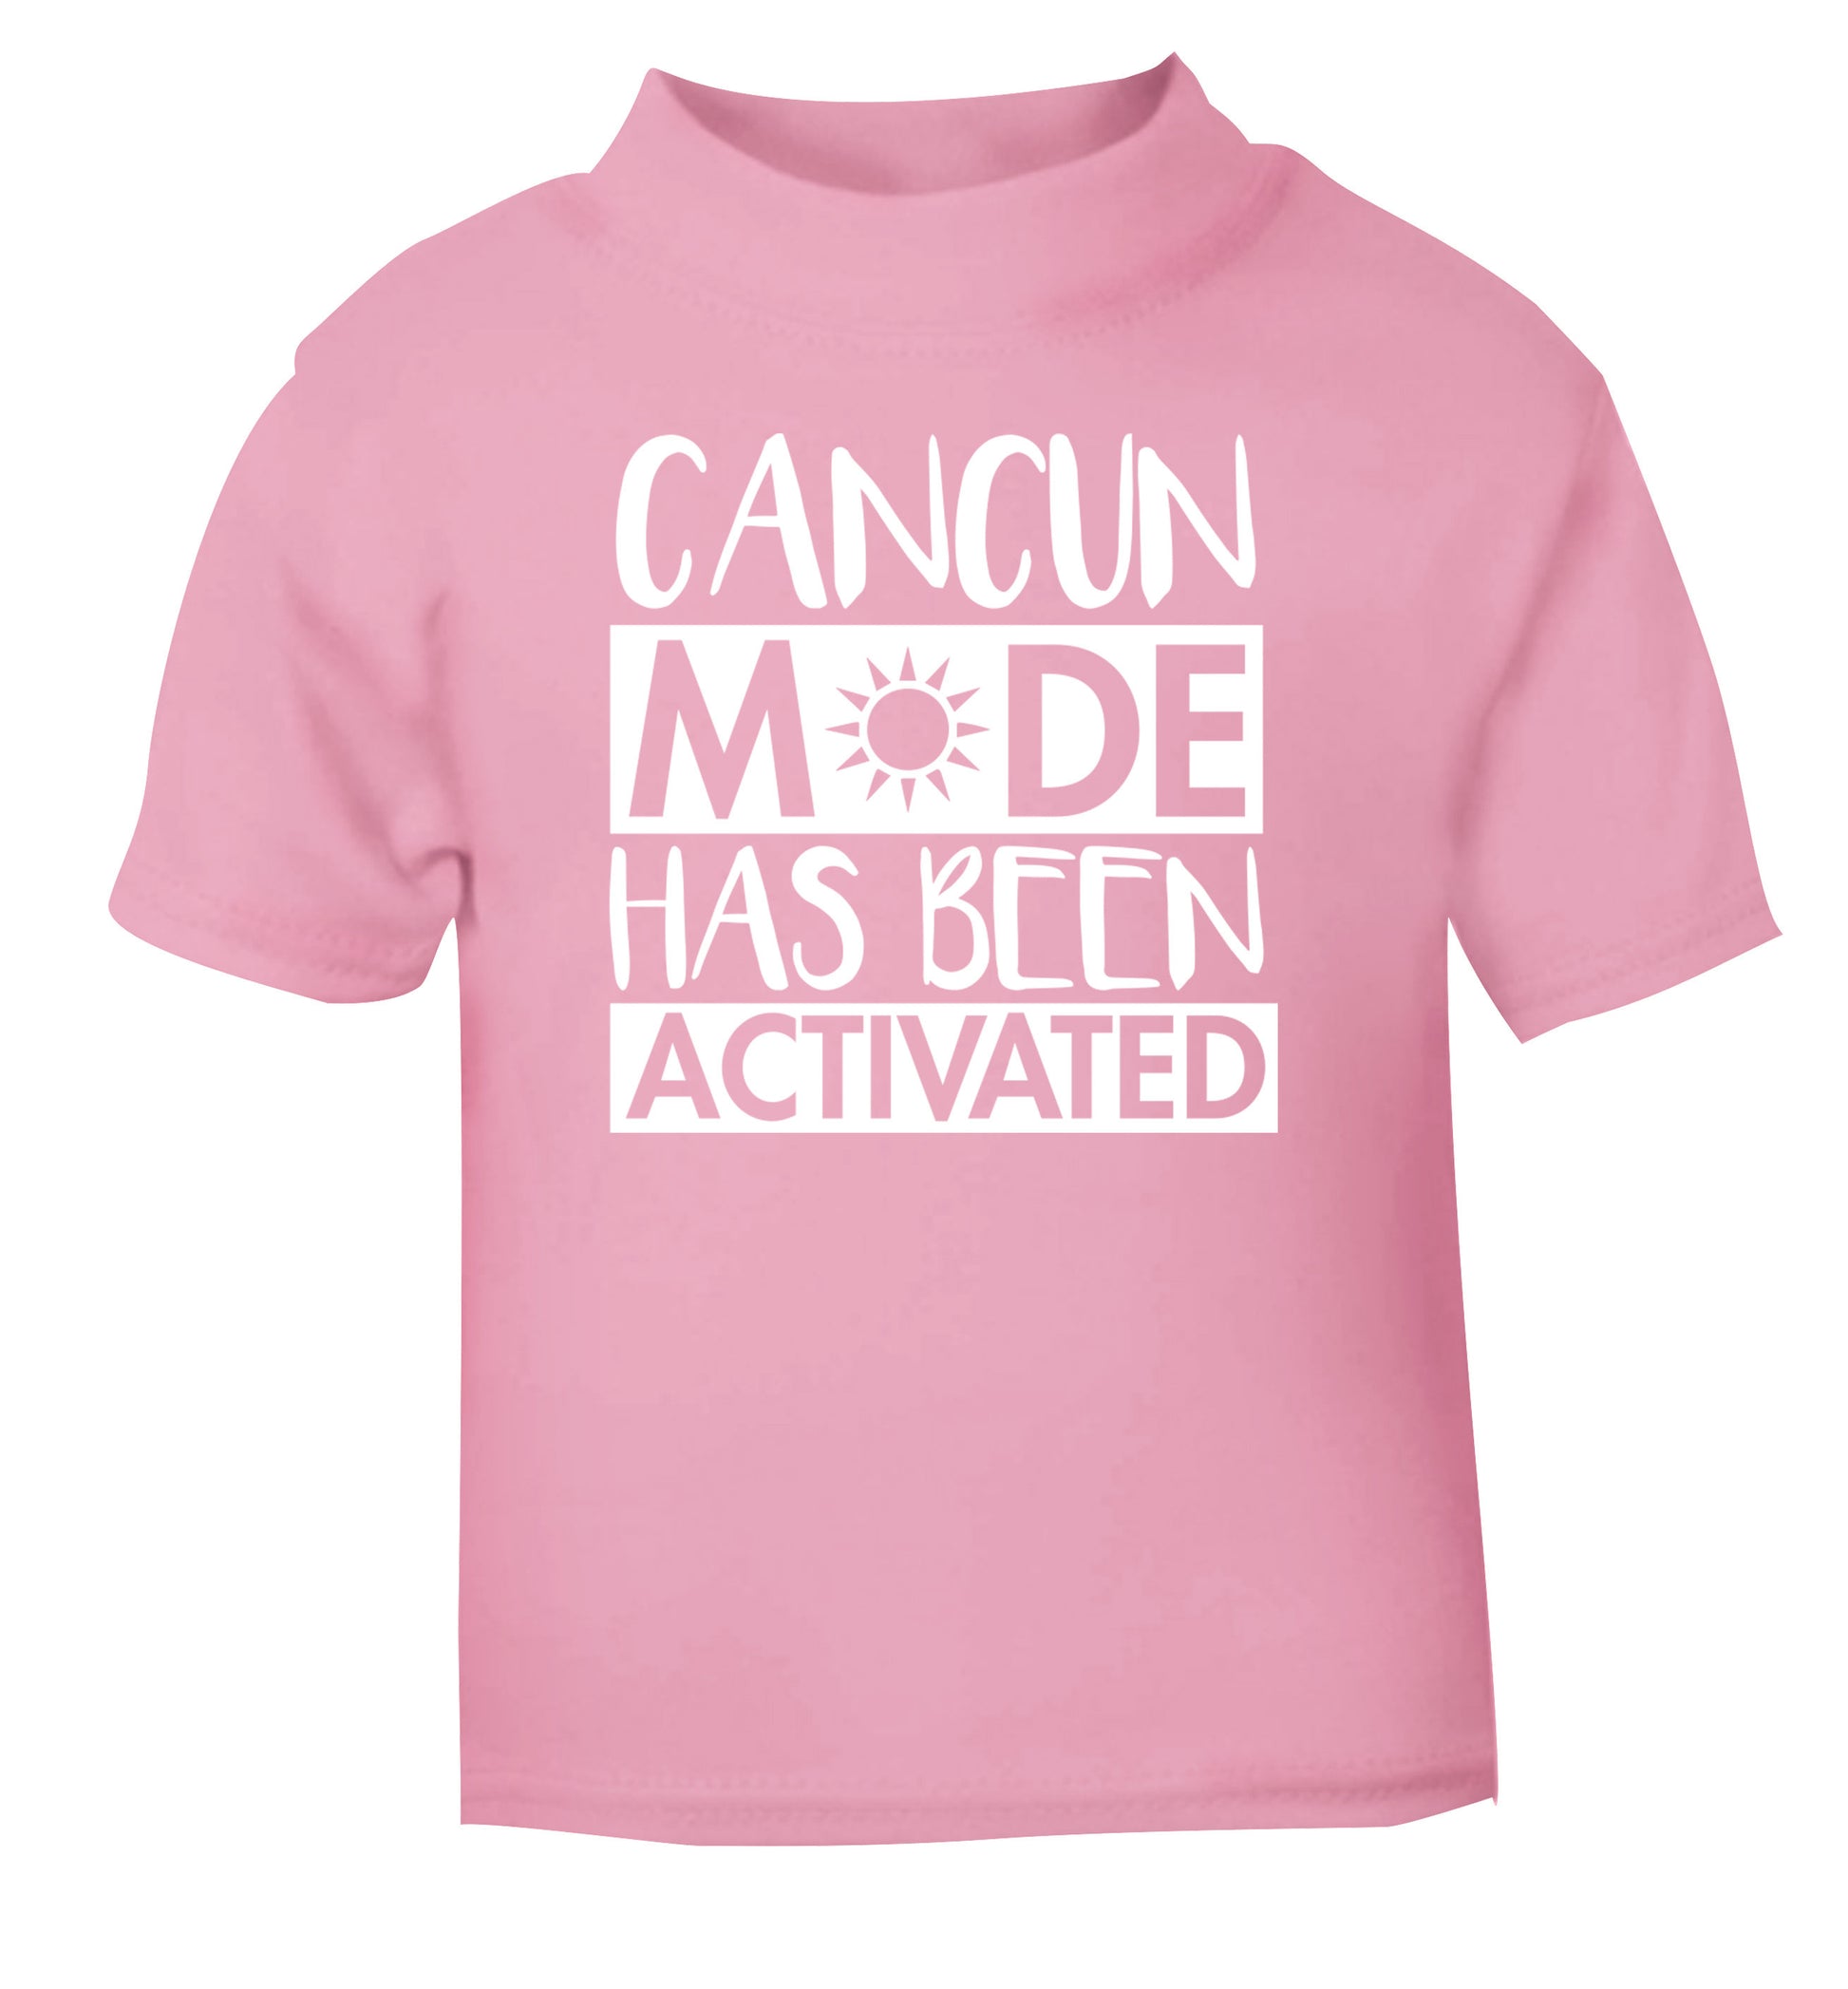 Cancun mode has been activated light pink Baby Toddler Tshirt 2 Years